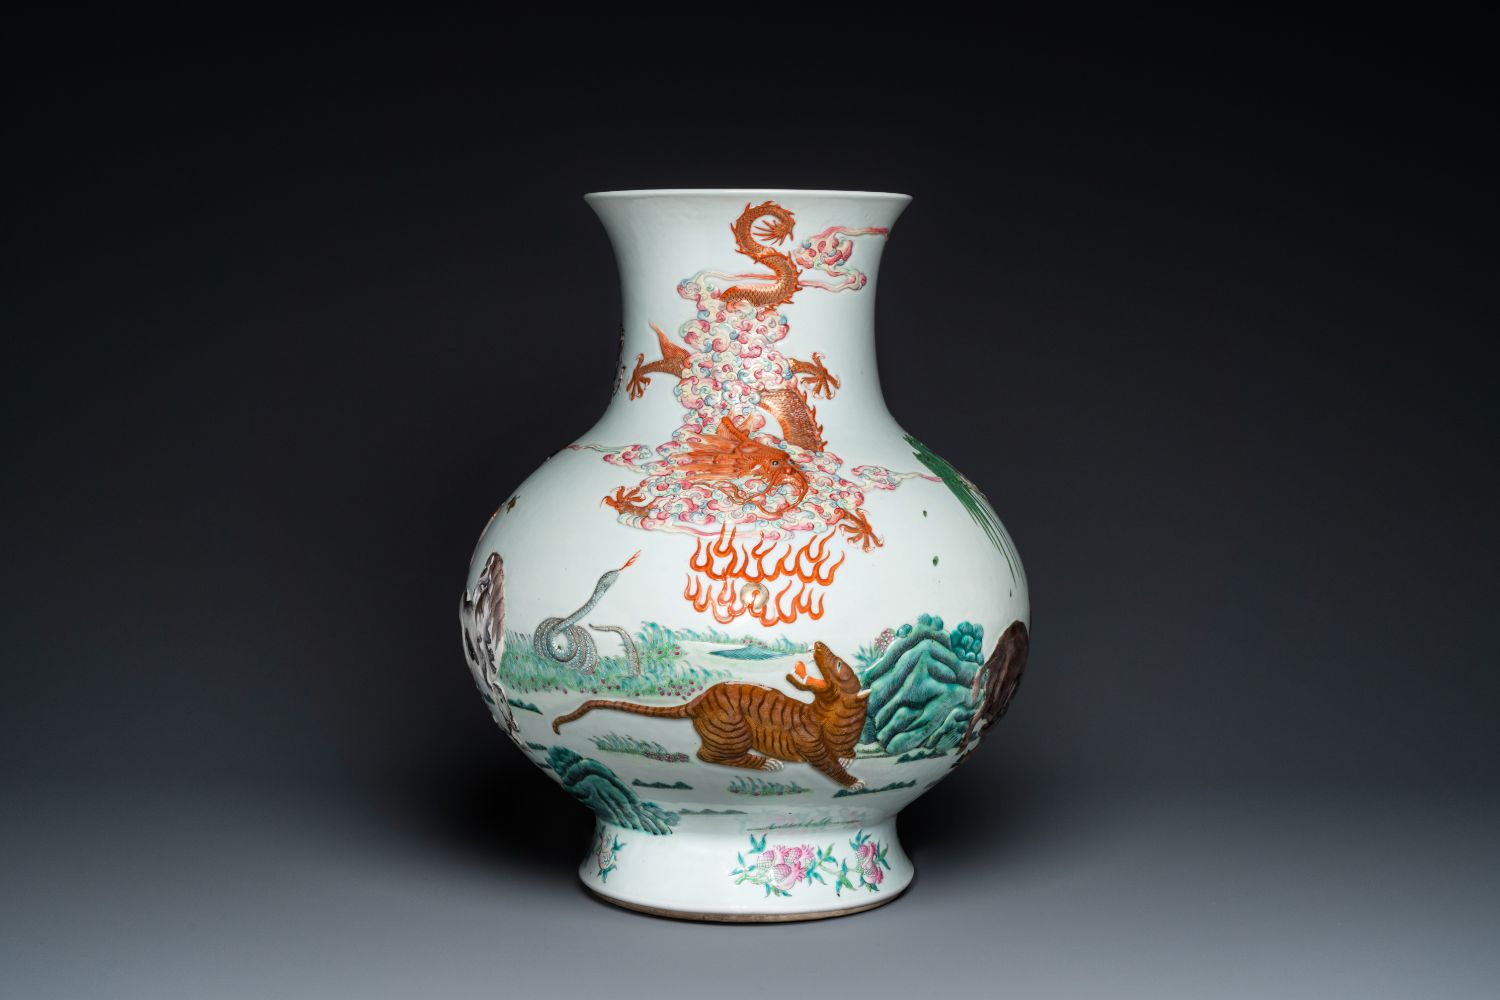 Four-day Asian & European arts auction, including important Chinese and Vietnamese works of art